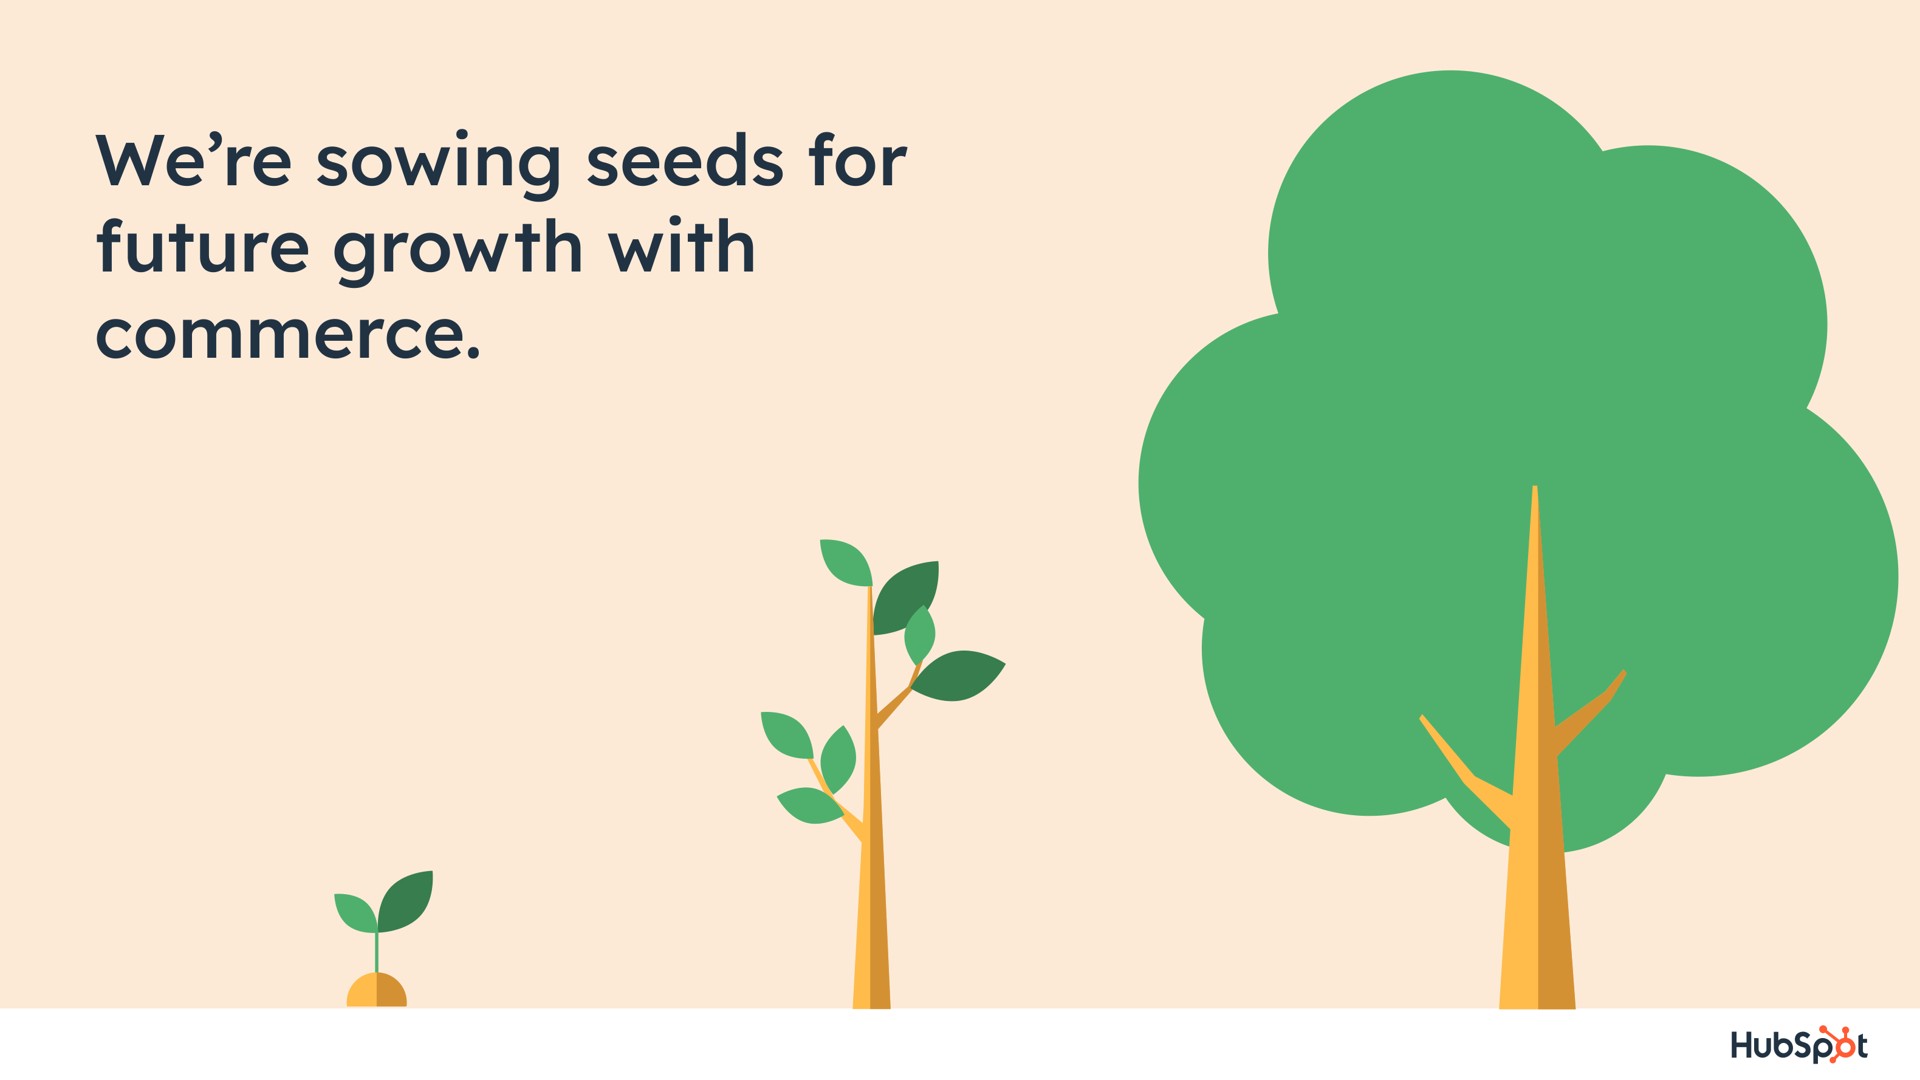 we sowing seeds for future growth with commerce | Hubspot